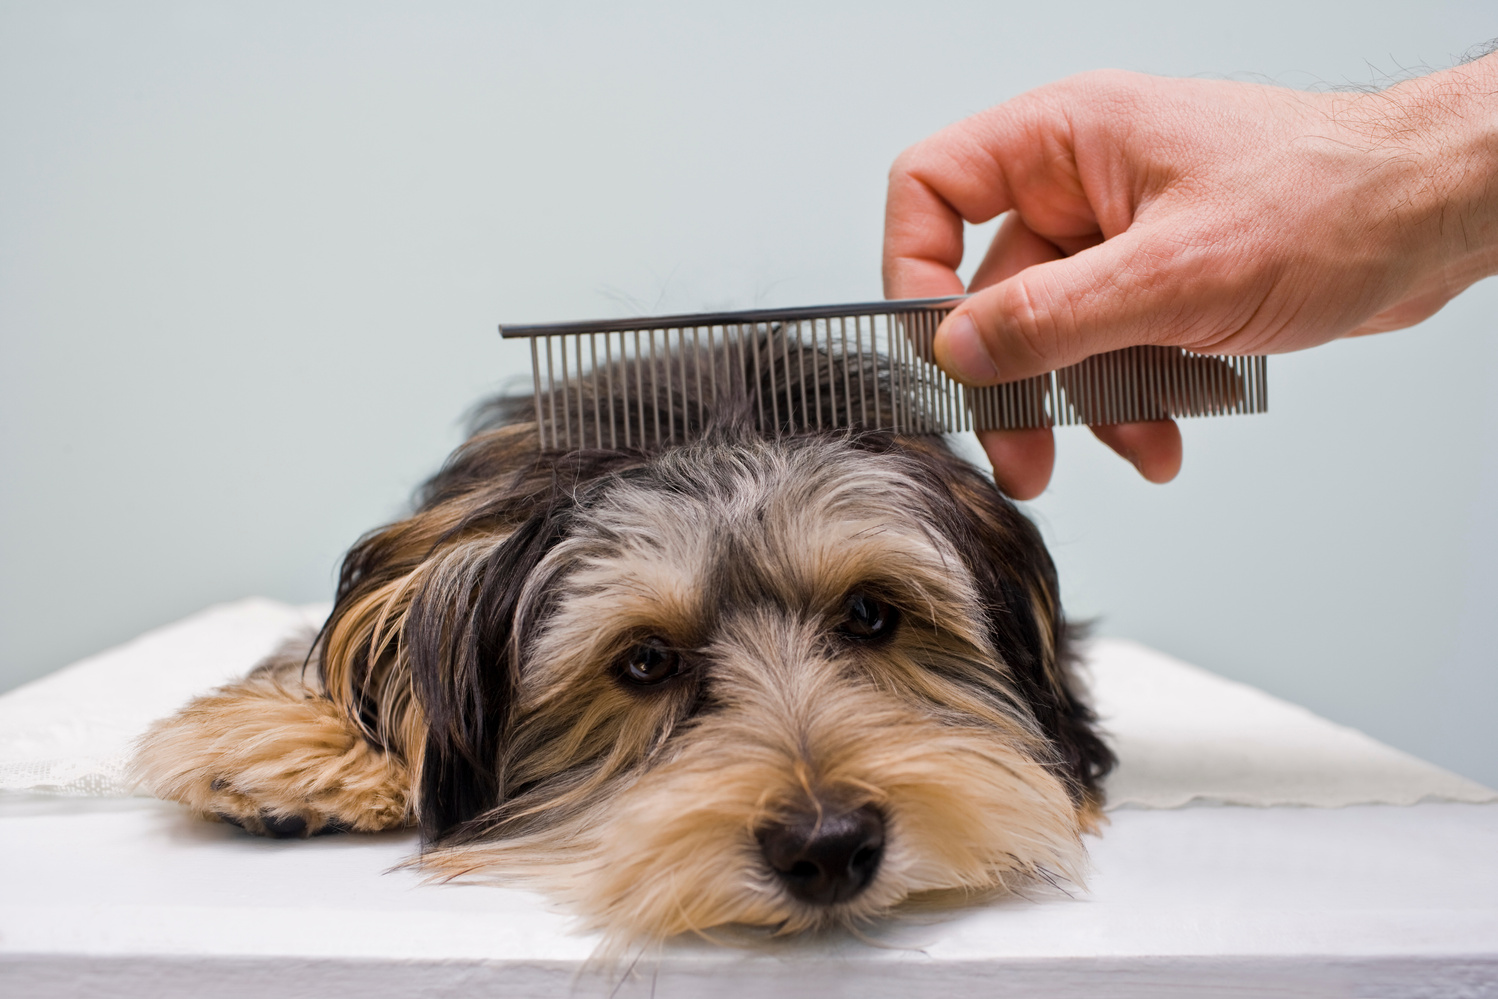 Dog Grooming with a comb